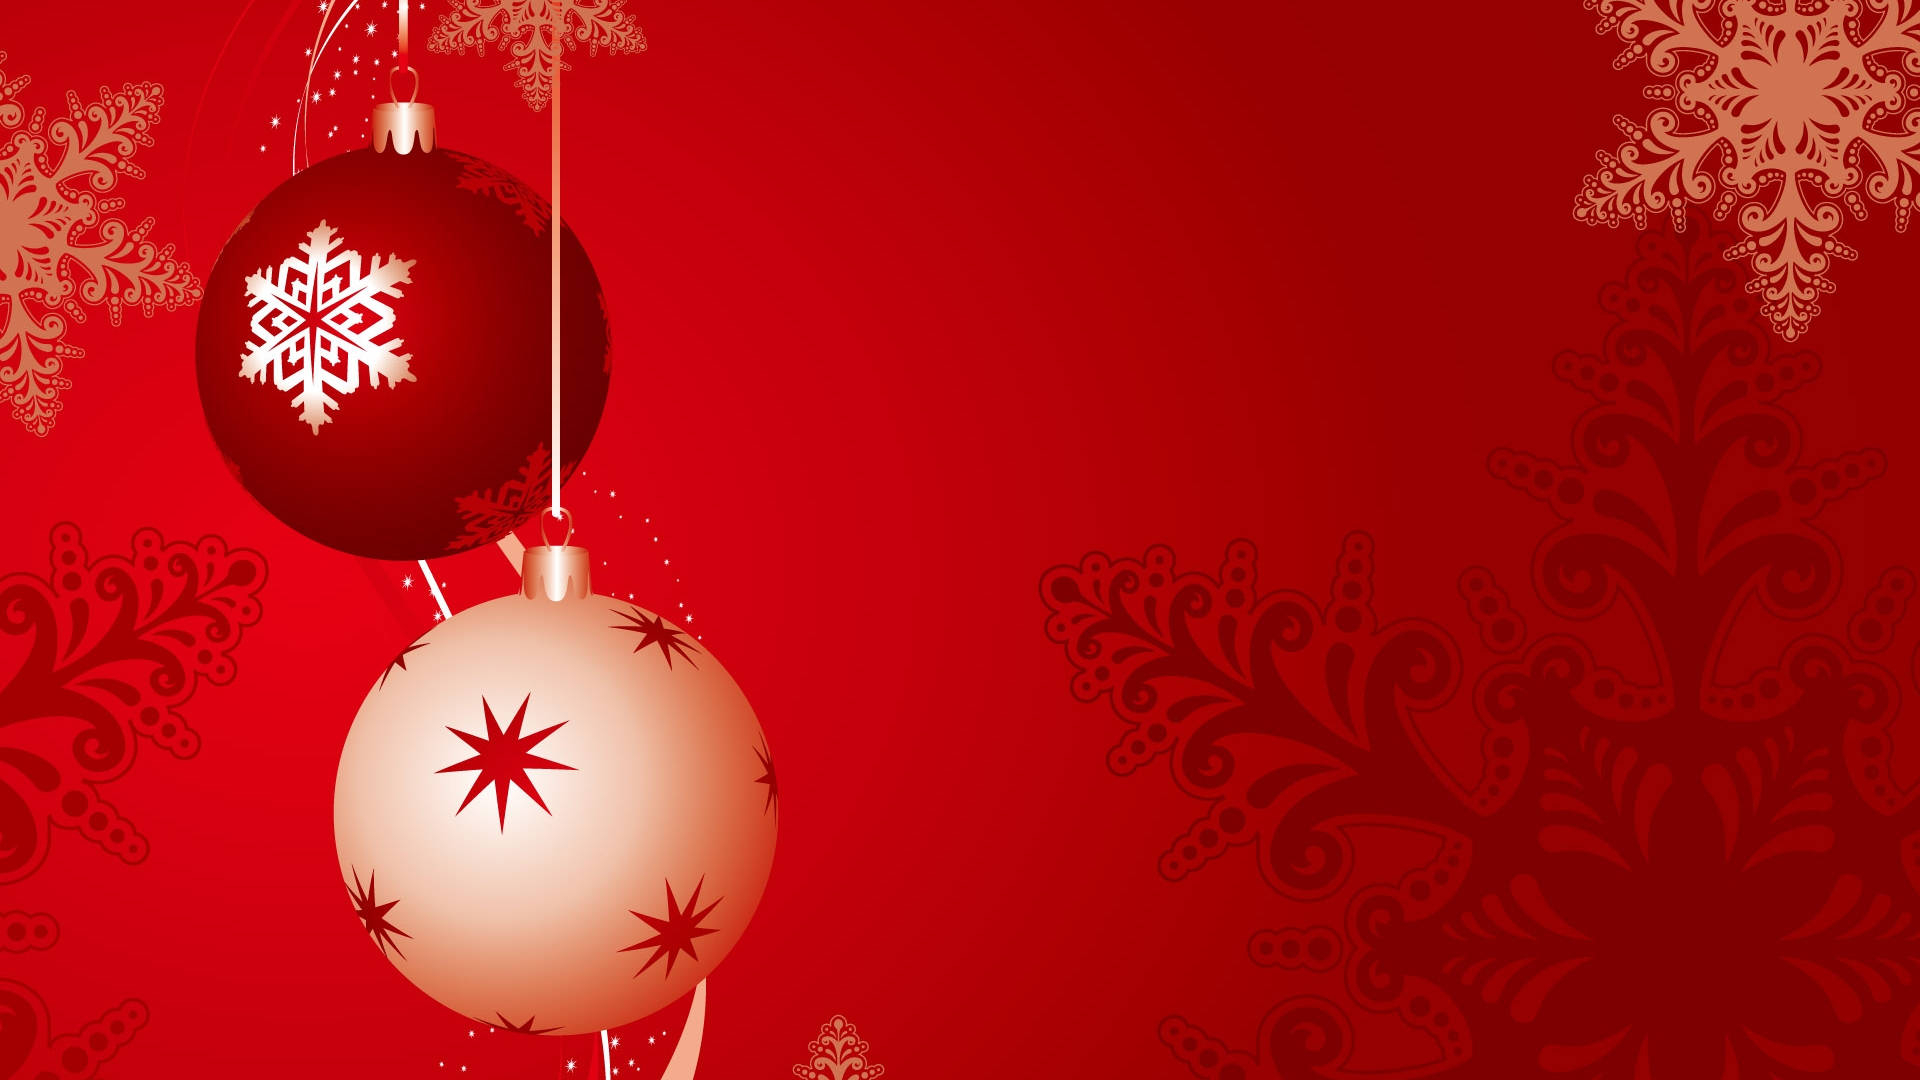 1920x1080 Download Red Christmas Background Elements Wallpaper